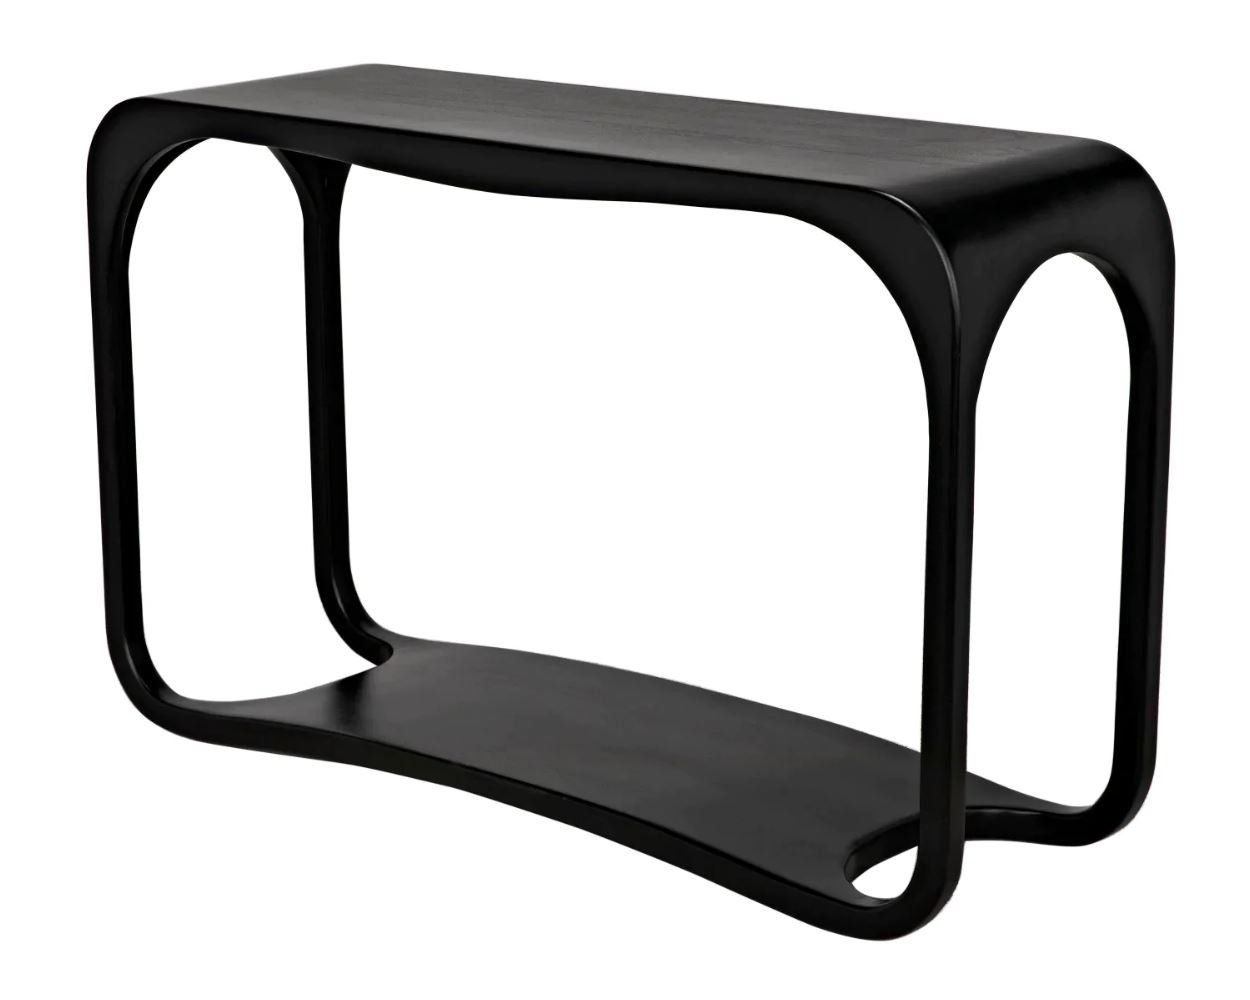 black rounded edge console table.JPG